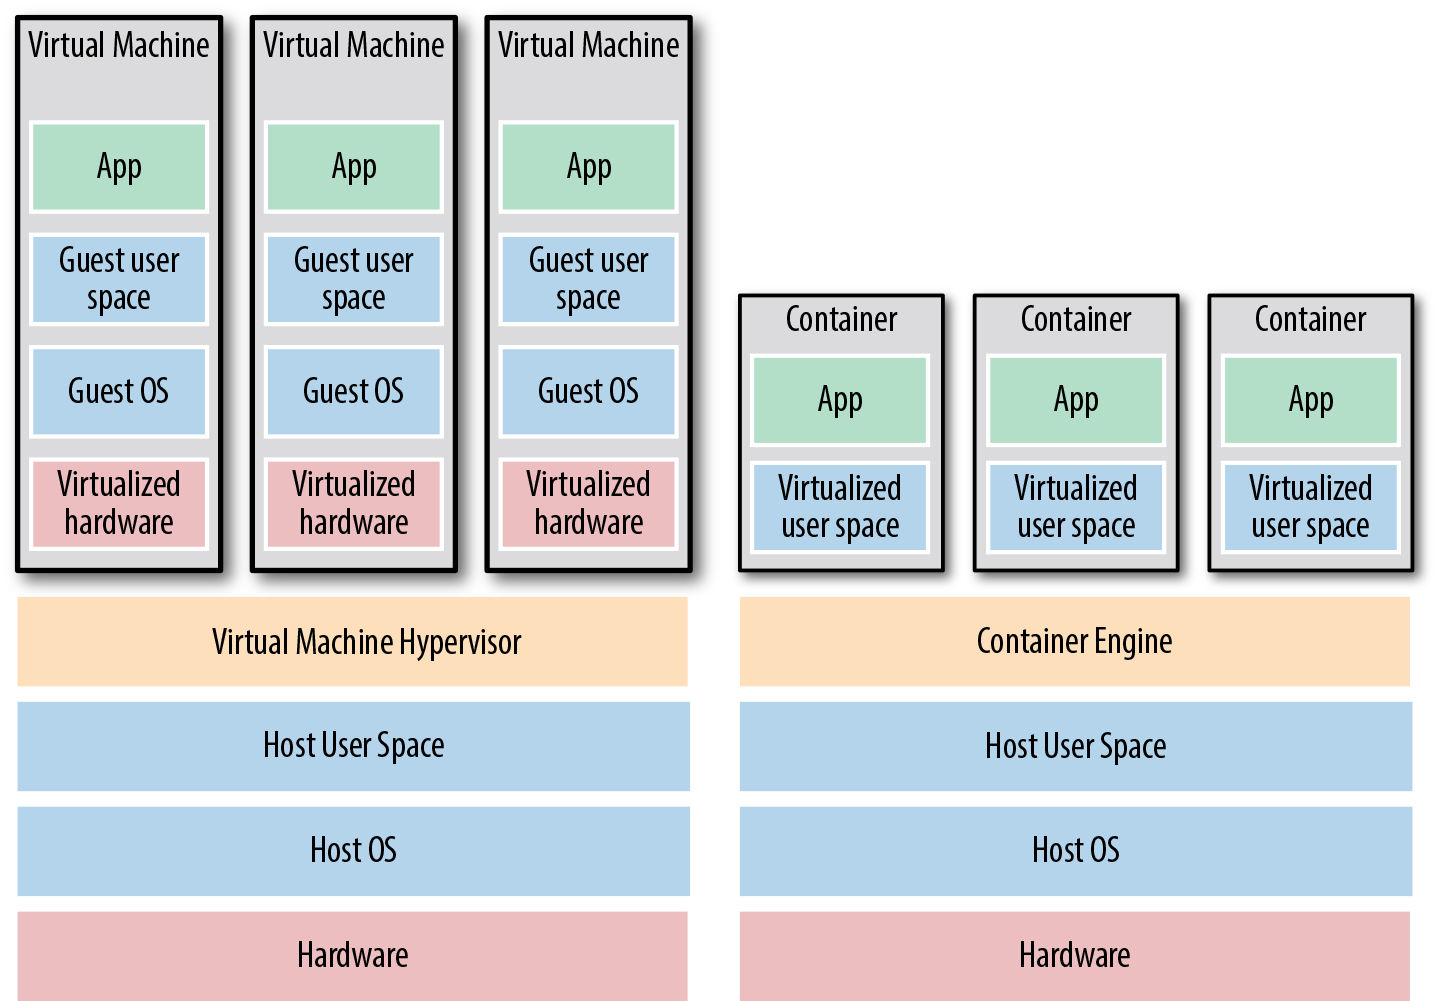 The two main types of images: VMs on the left, and containers on the right. VMs virtualize the hardware, whereas containers virtualize only user space.